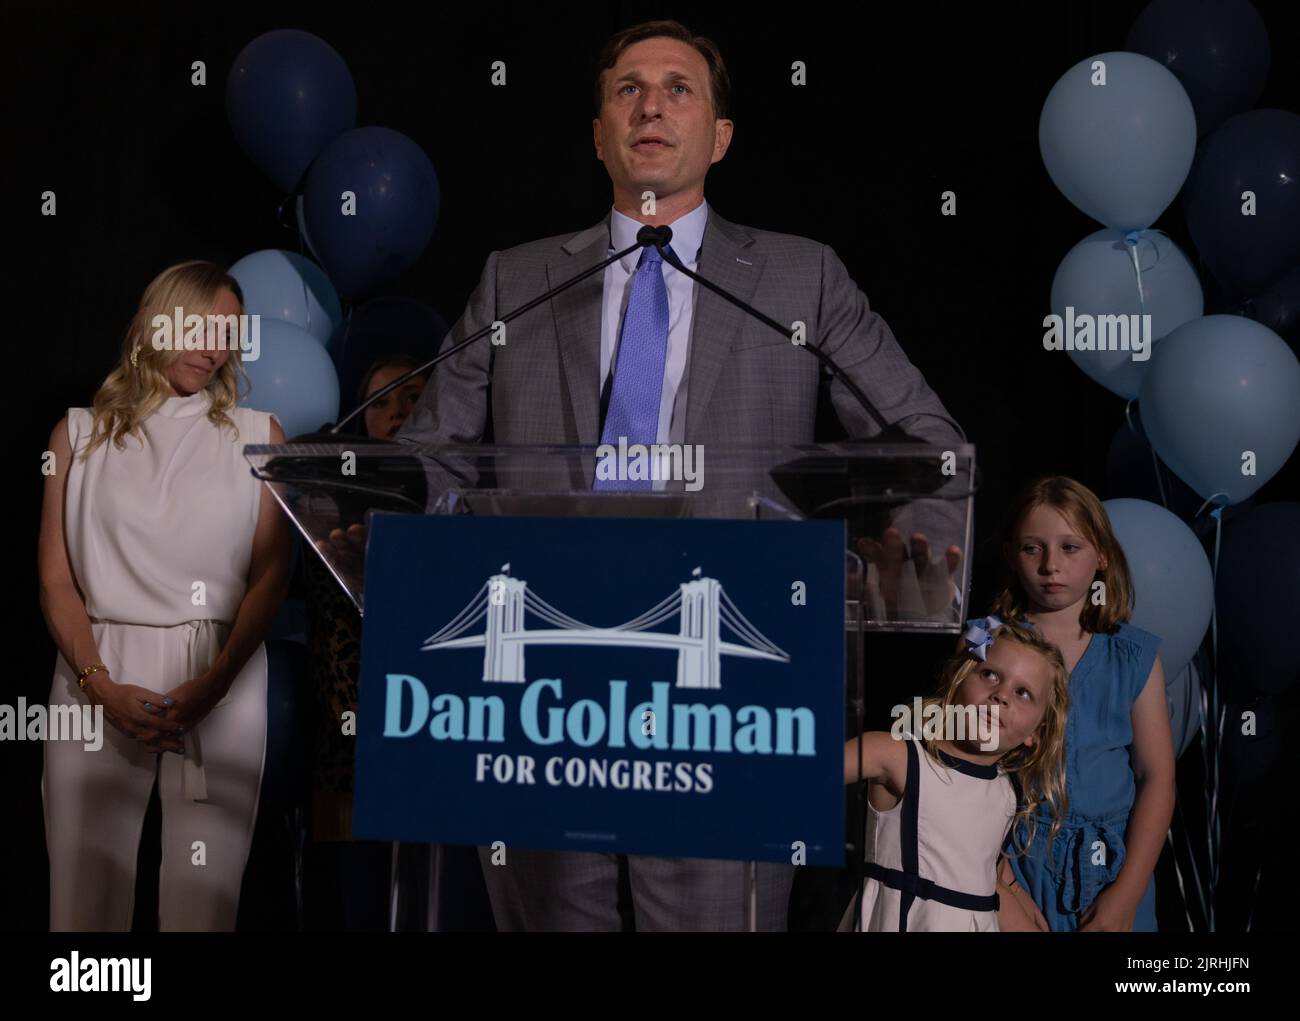 NEW YORK, N.Y. – August 23, 2022: Democratic congressional candidate Dan Goldman addresses supporters during his primary election night watch party. Stock Photo